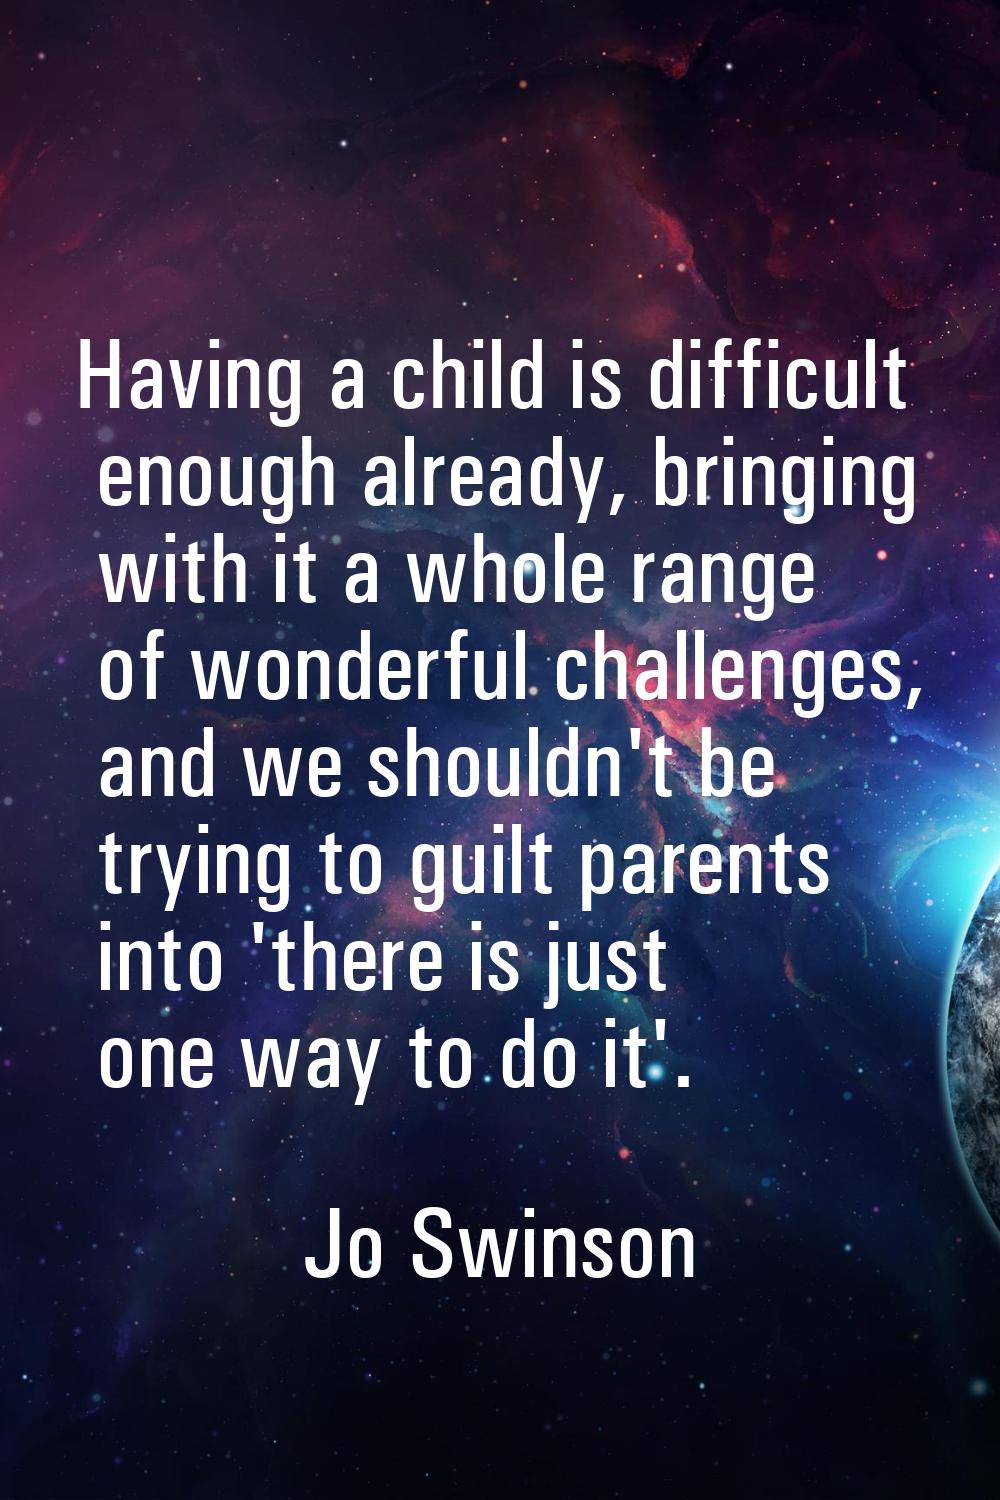 Having a child is difficult enough already, bringing with it a whole range of wonderful challenges,